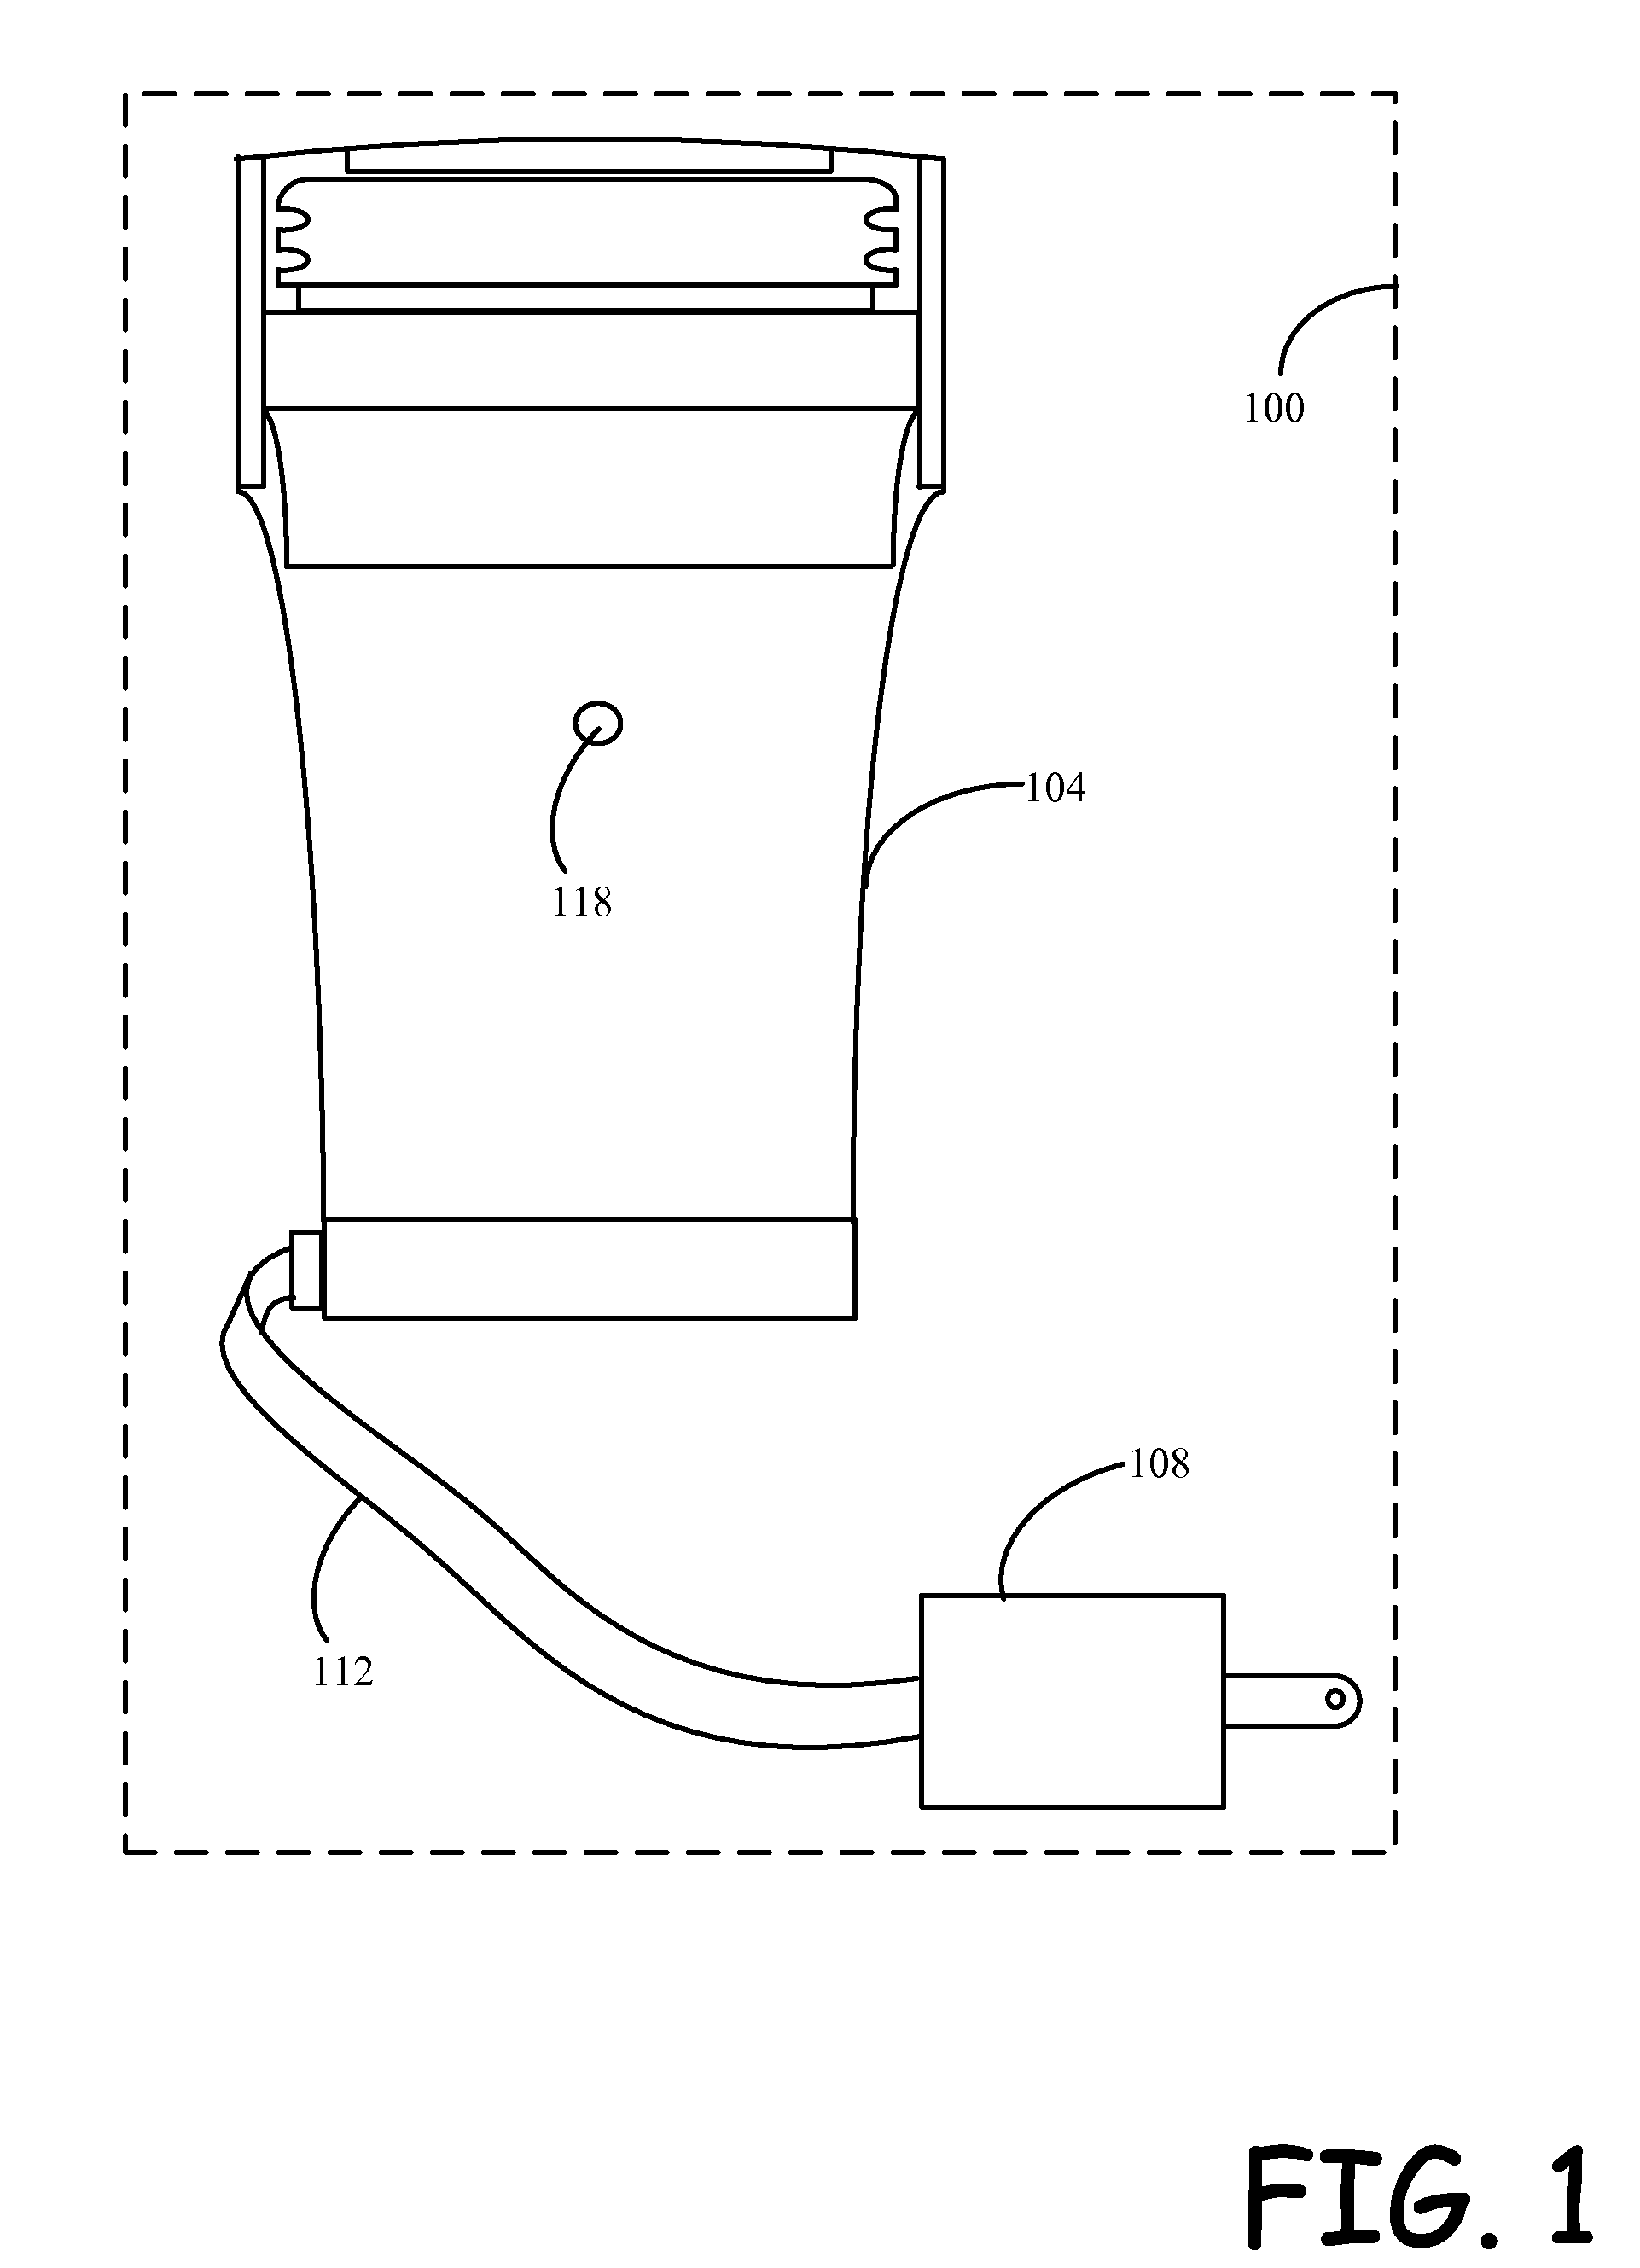 Hair removal apparatus for personal use and the method of using same